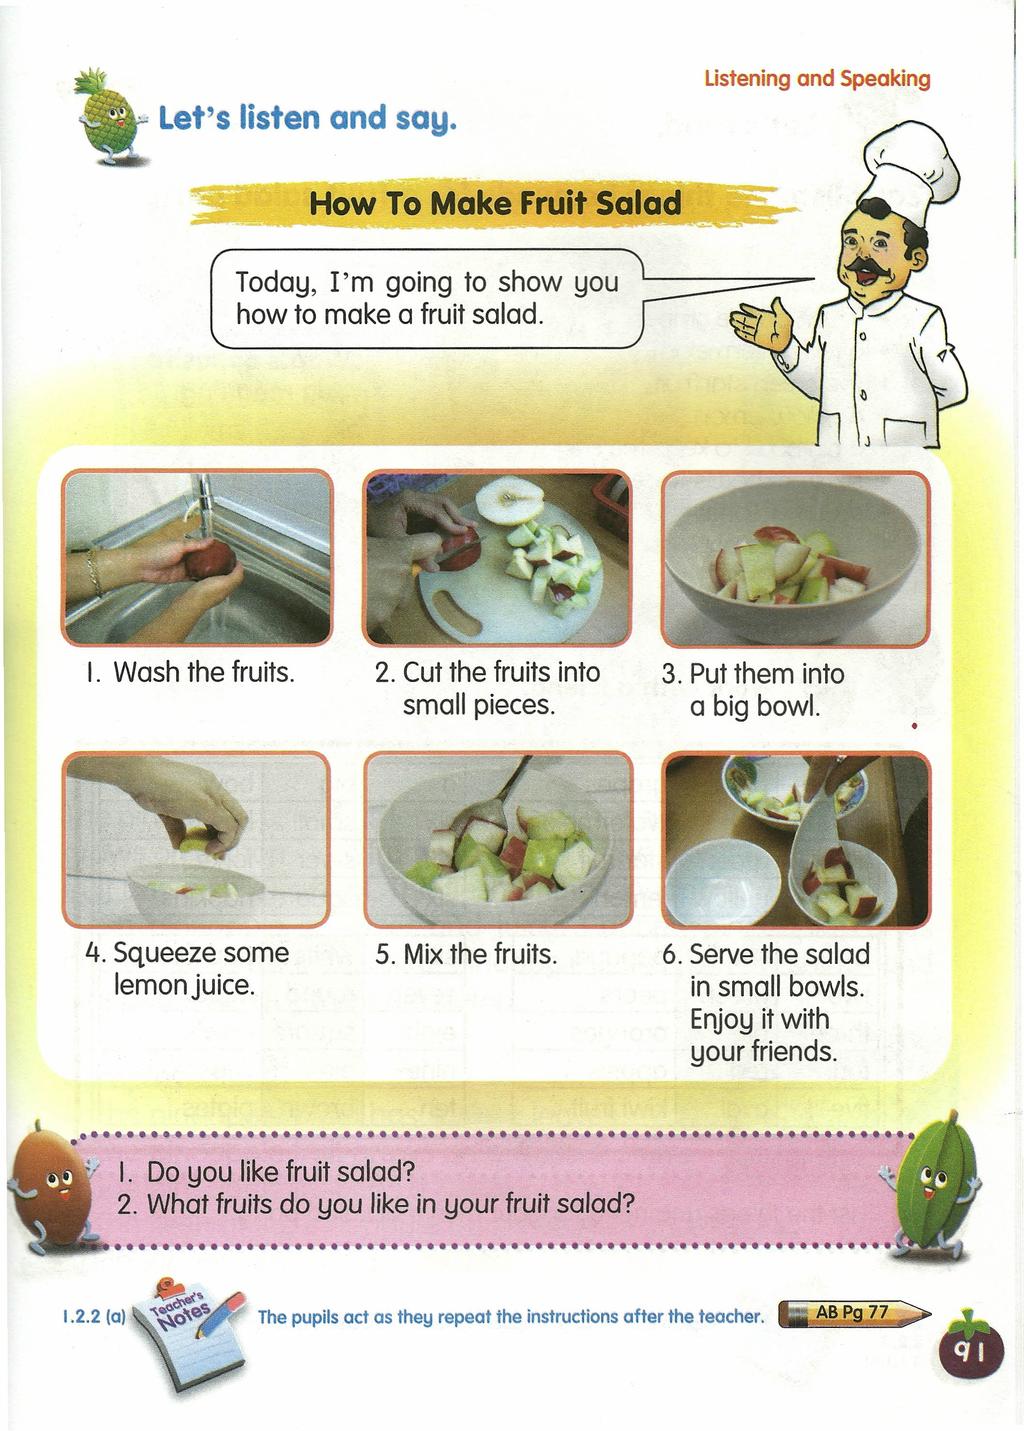 Let's listen and say. Listening and Speaking -~-How To Make Fruit Salad -~~.-- Today, I'm going to show you how to make a fruit salad. I. Wash the fruits. 2. Cut the fruits into small pieces. 3.